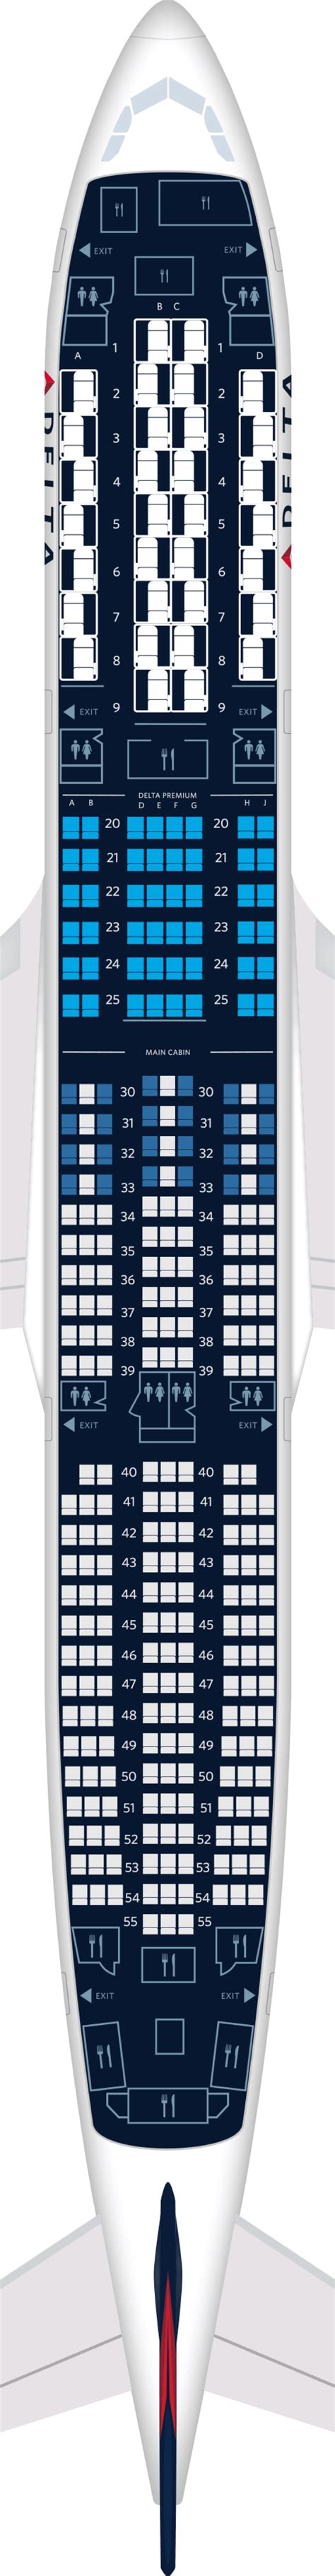 Airbus A350 Aircraft Seat Maps Specs And Amenities Delta Air Lines